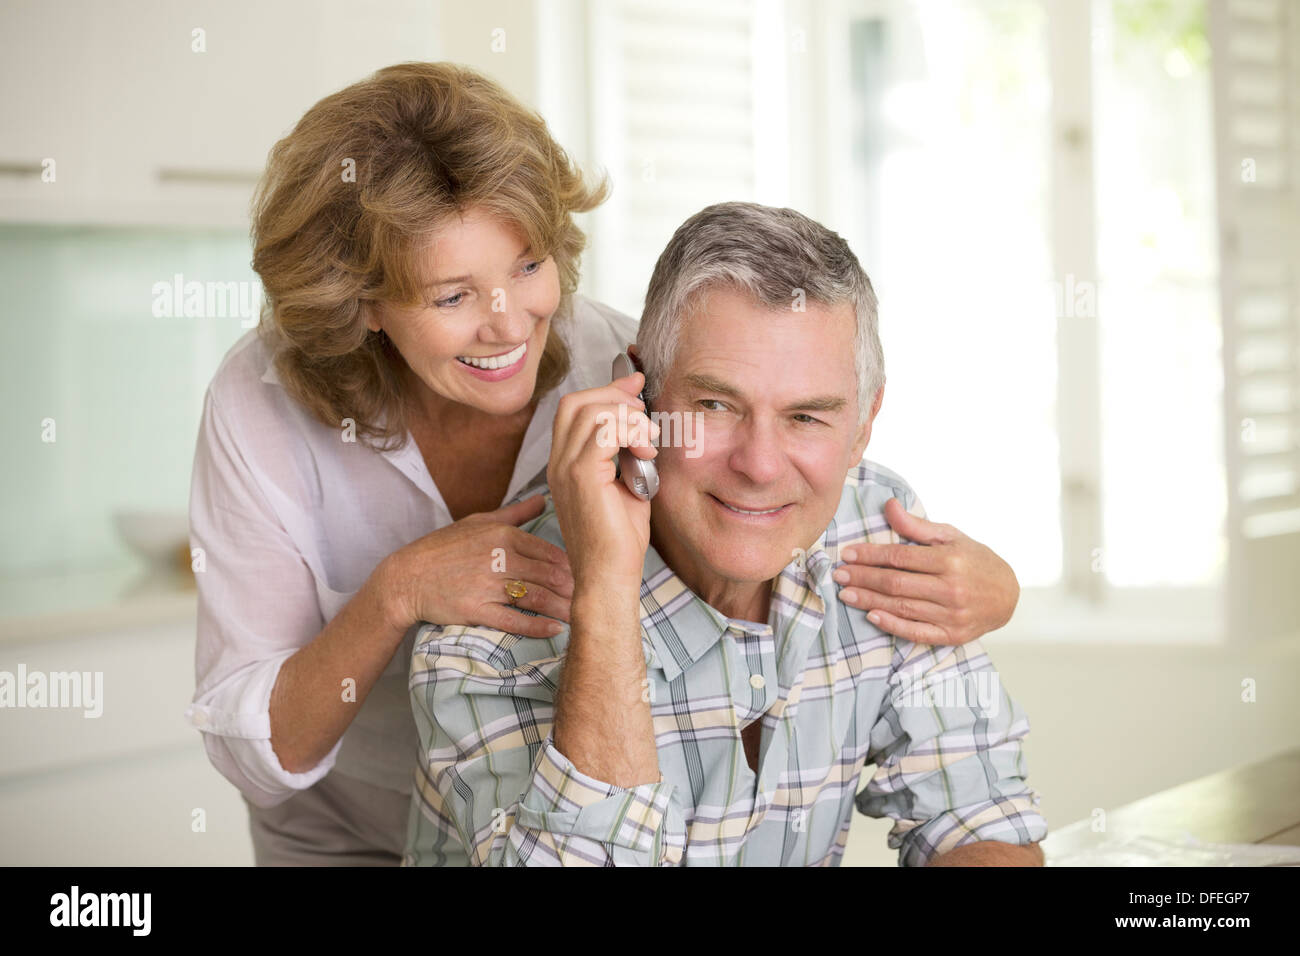 Senior couple talking on telephone Banque D'Images